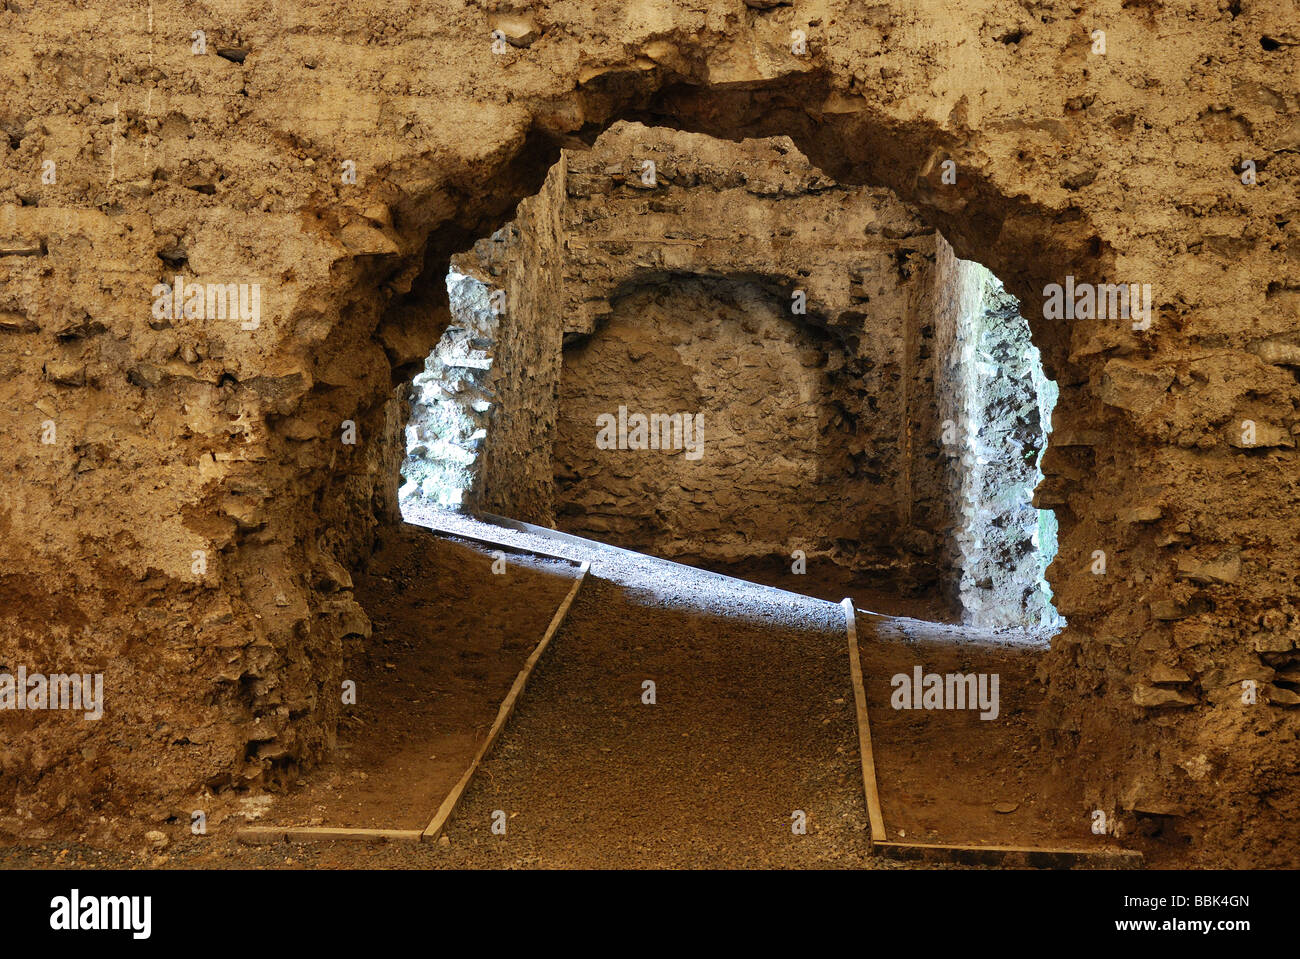 Vaulted rooms inside Barco Borghese archaeological site in Monte Porzio Catone (Rome, Italy). Stock Photo